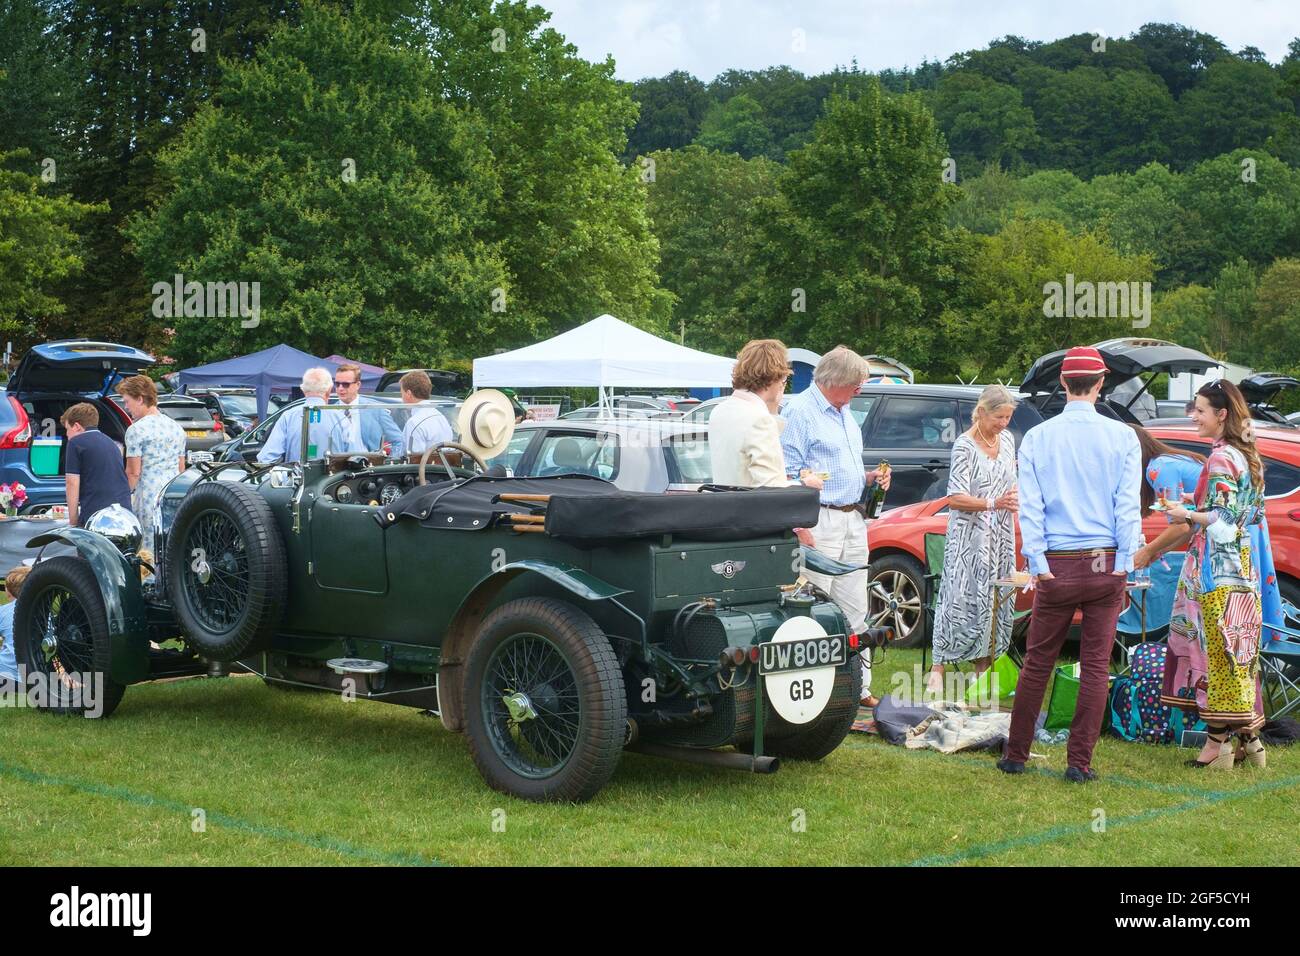 Spectators at Henley Royal Regatta 2021 on the River Thames lunch in the car park by their vintage Bentley Stock Photo